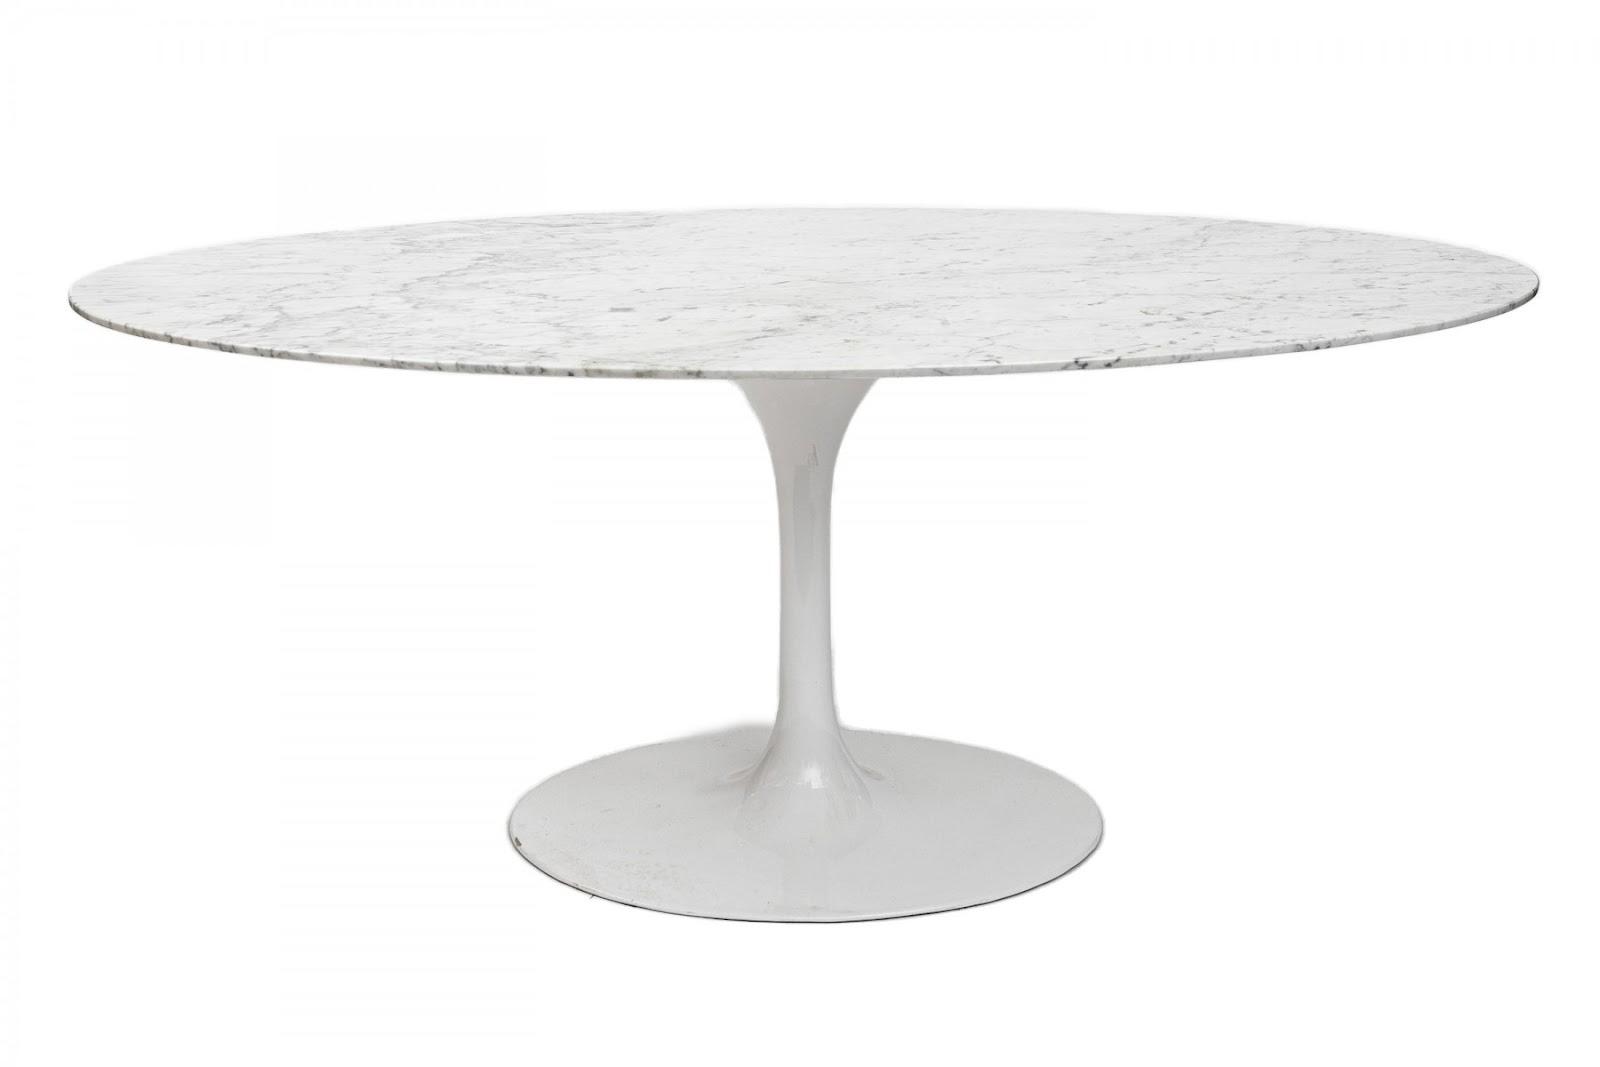 This tulip dining table would be beautiful in any setting.